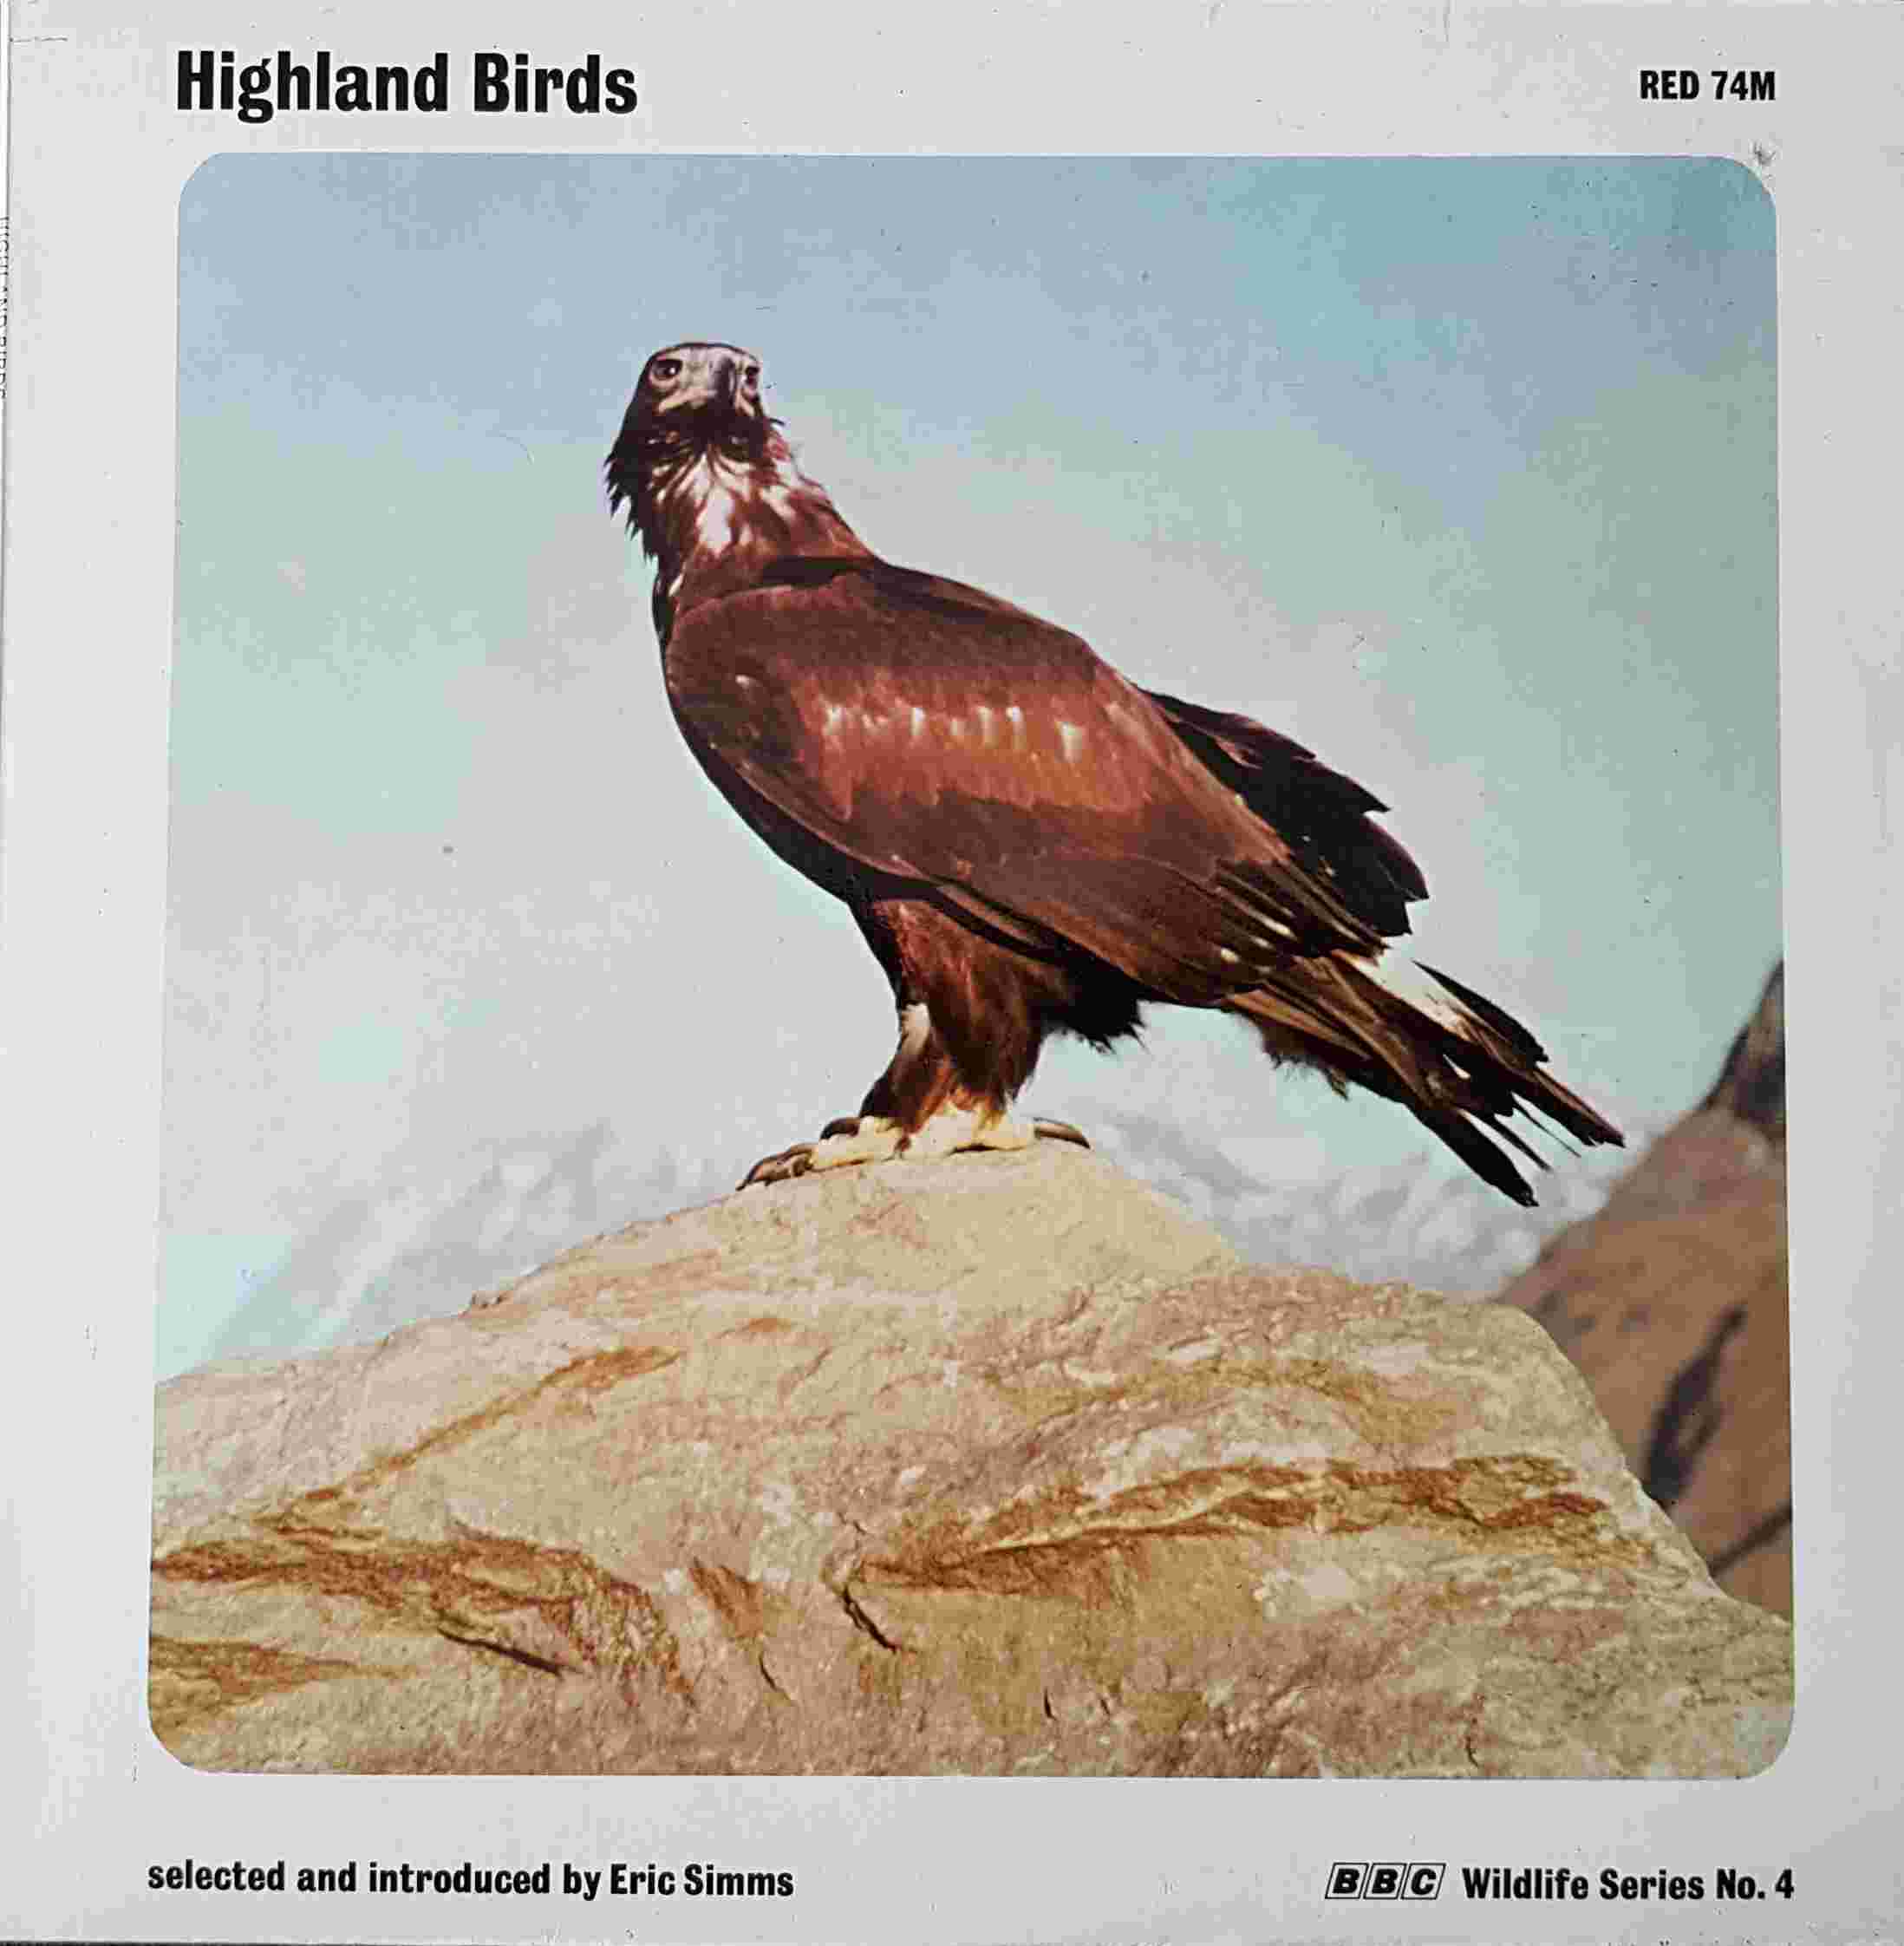 Picture of RED 74 Highland birds by artist Various from the BBC albums - Records and Tapes library